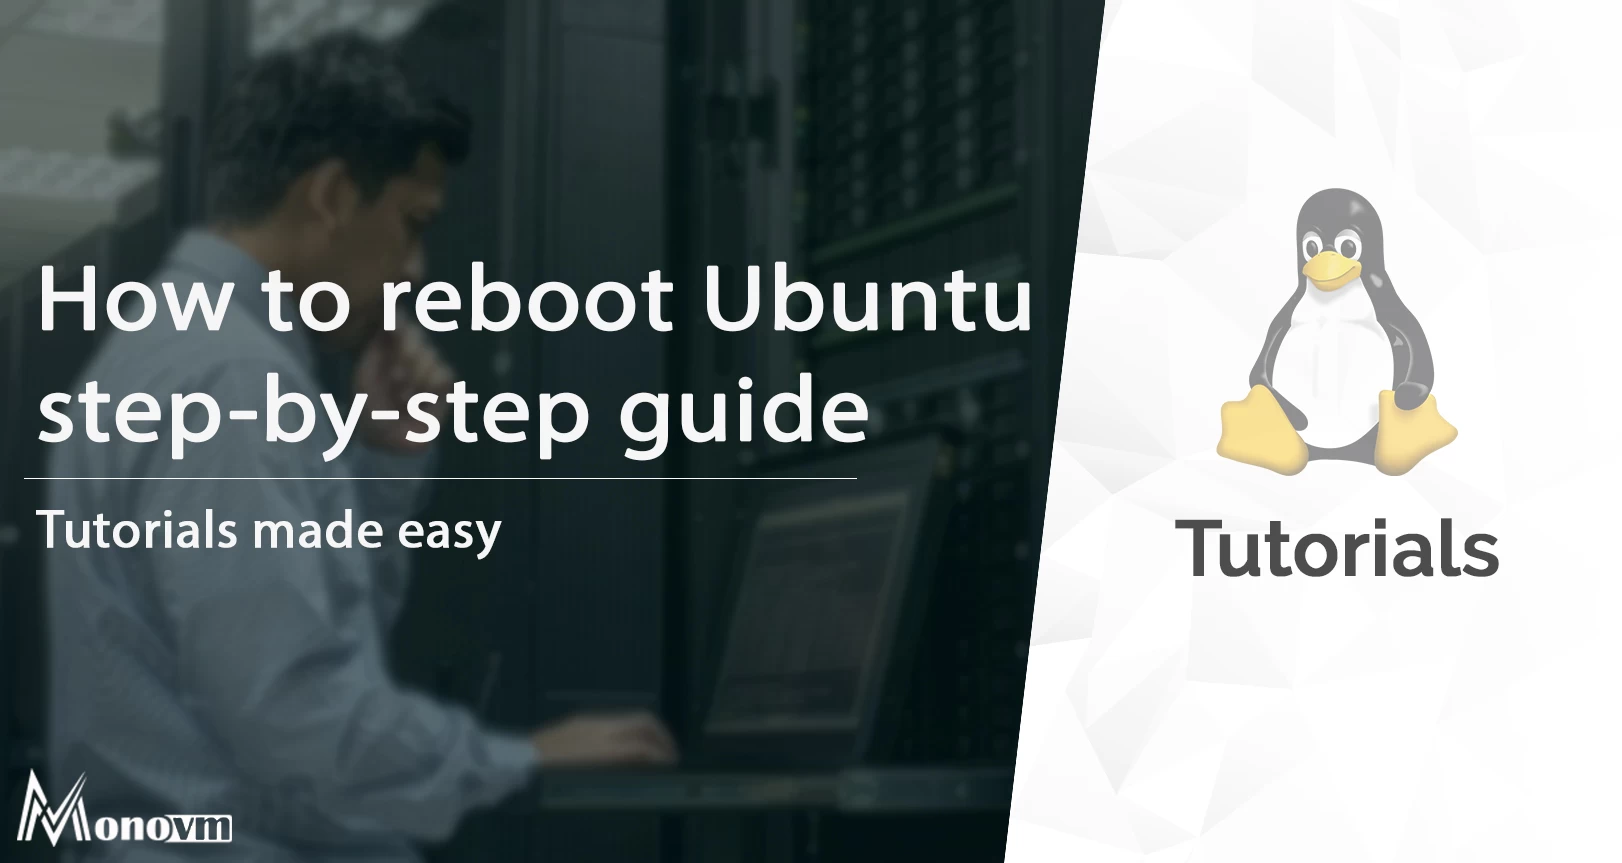 How to Reboot Ubuntu System Safely and Efficiently